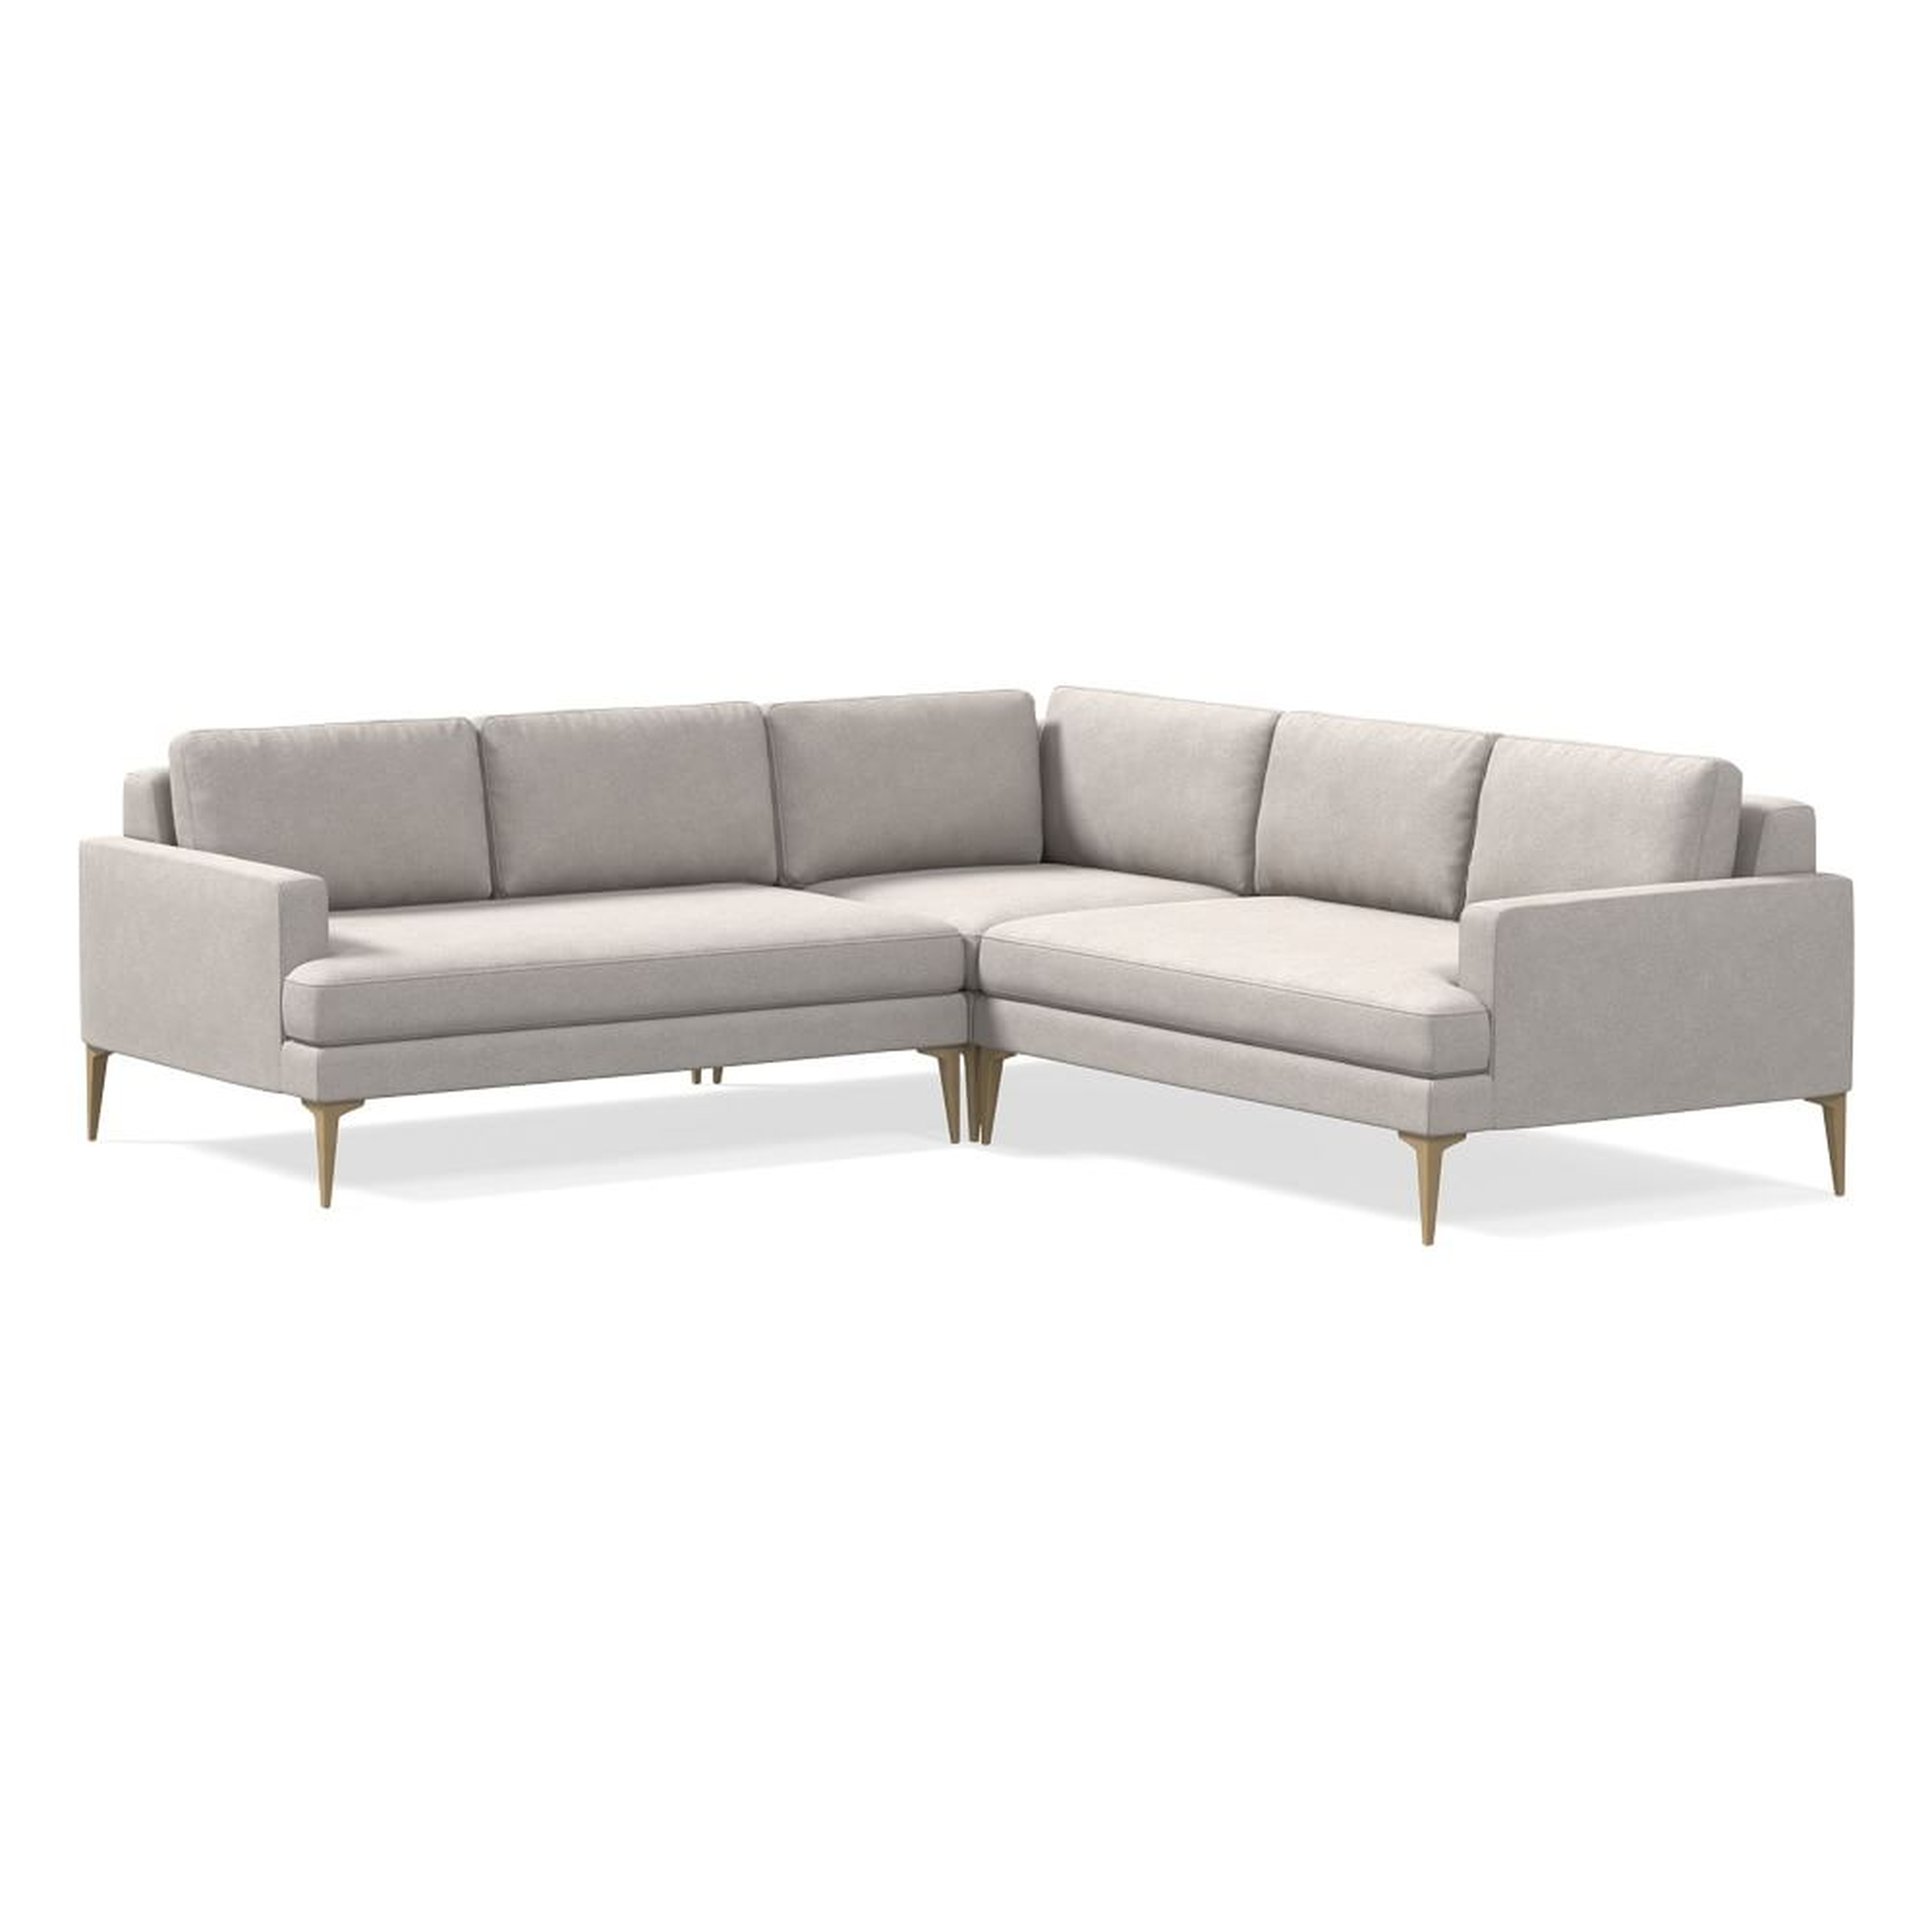 Andes 94" Multi Seat 3-Piece L-Shaped Sectional, Standard Depth, Distressed Velvet, Pearl Gray, BB - West Elm